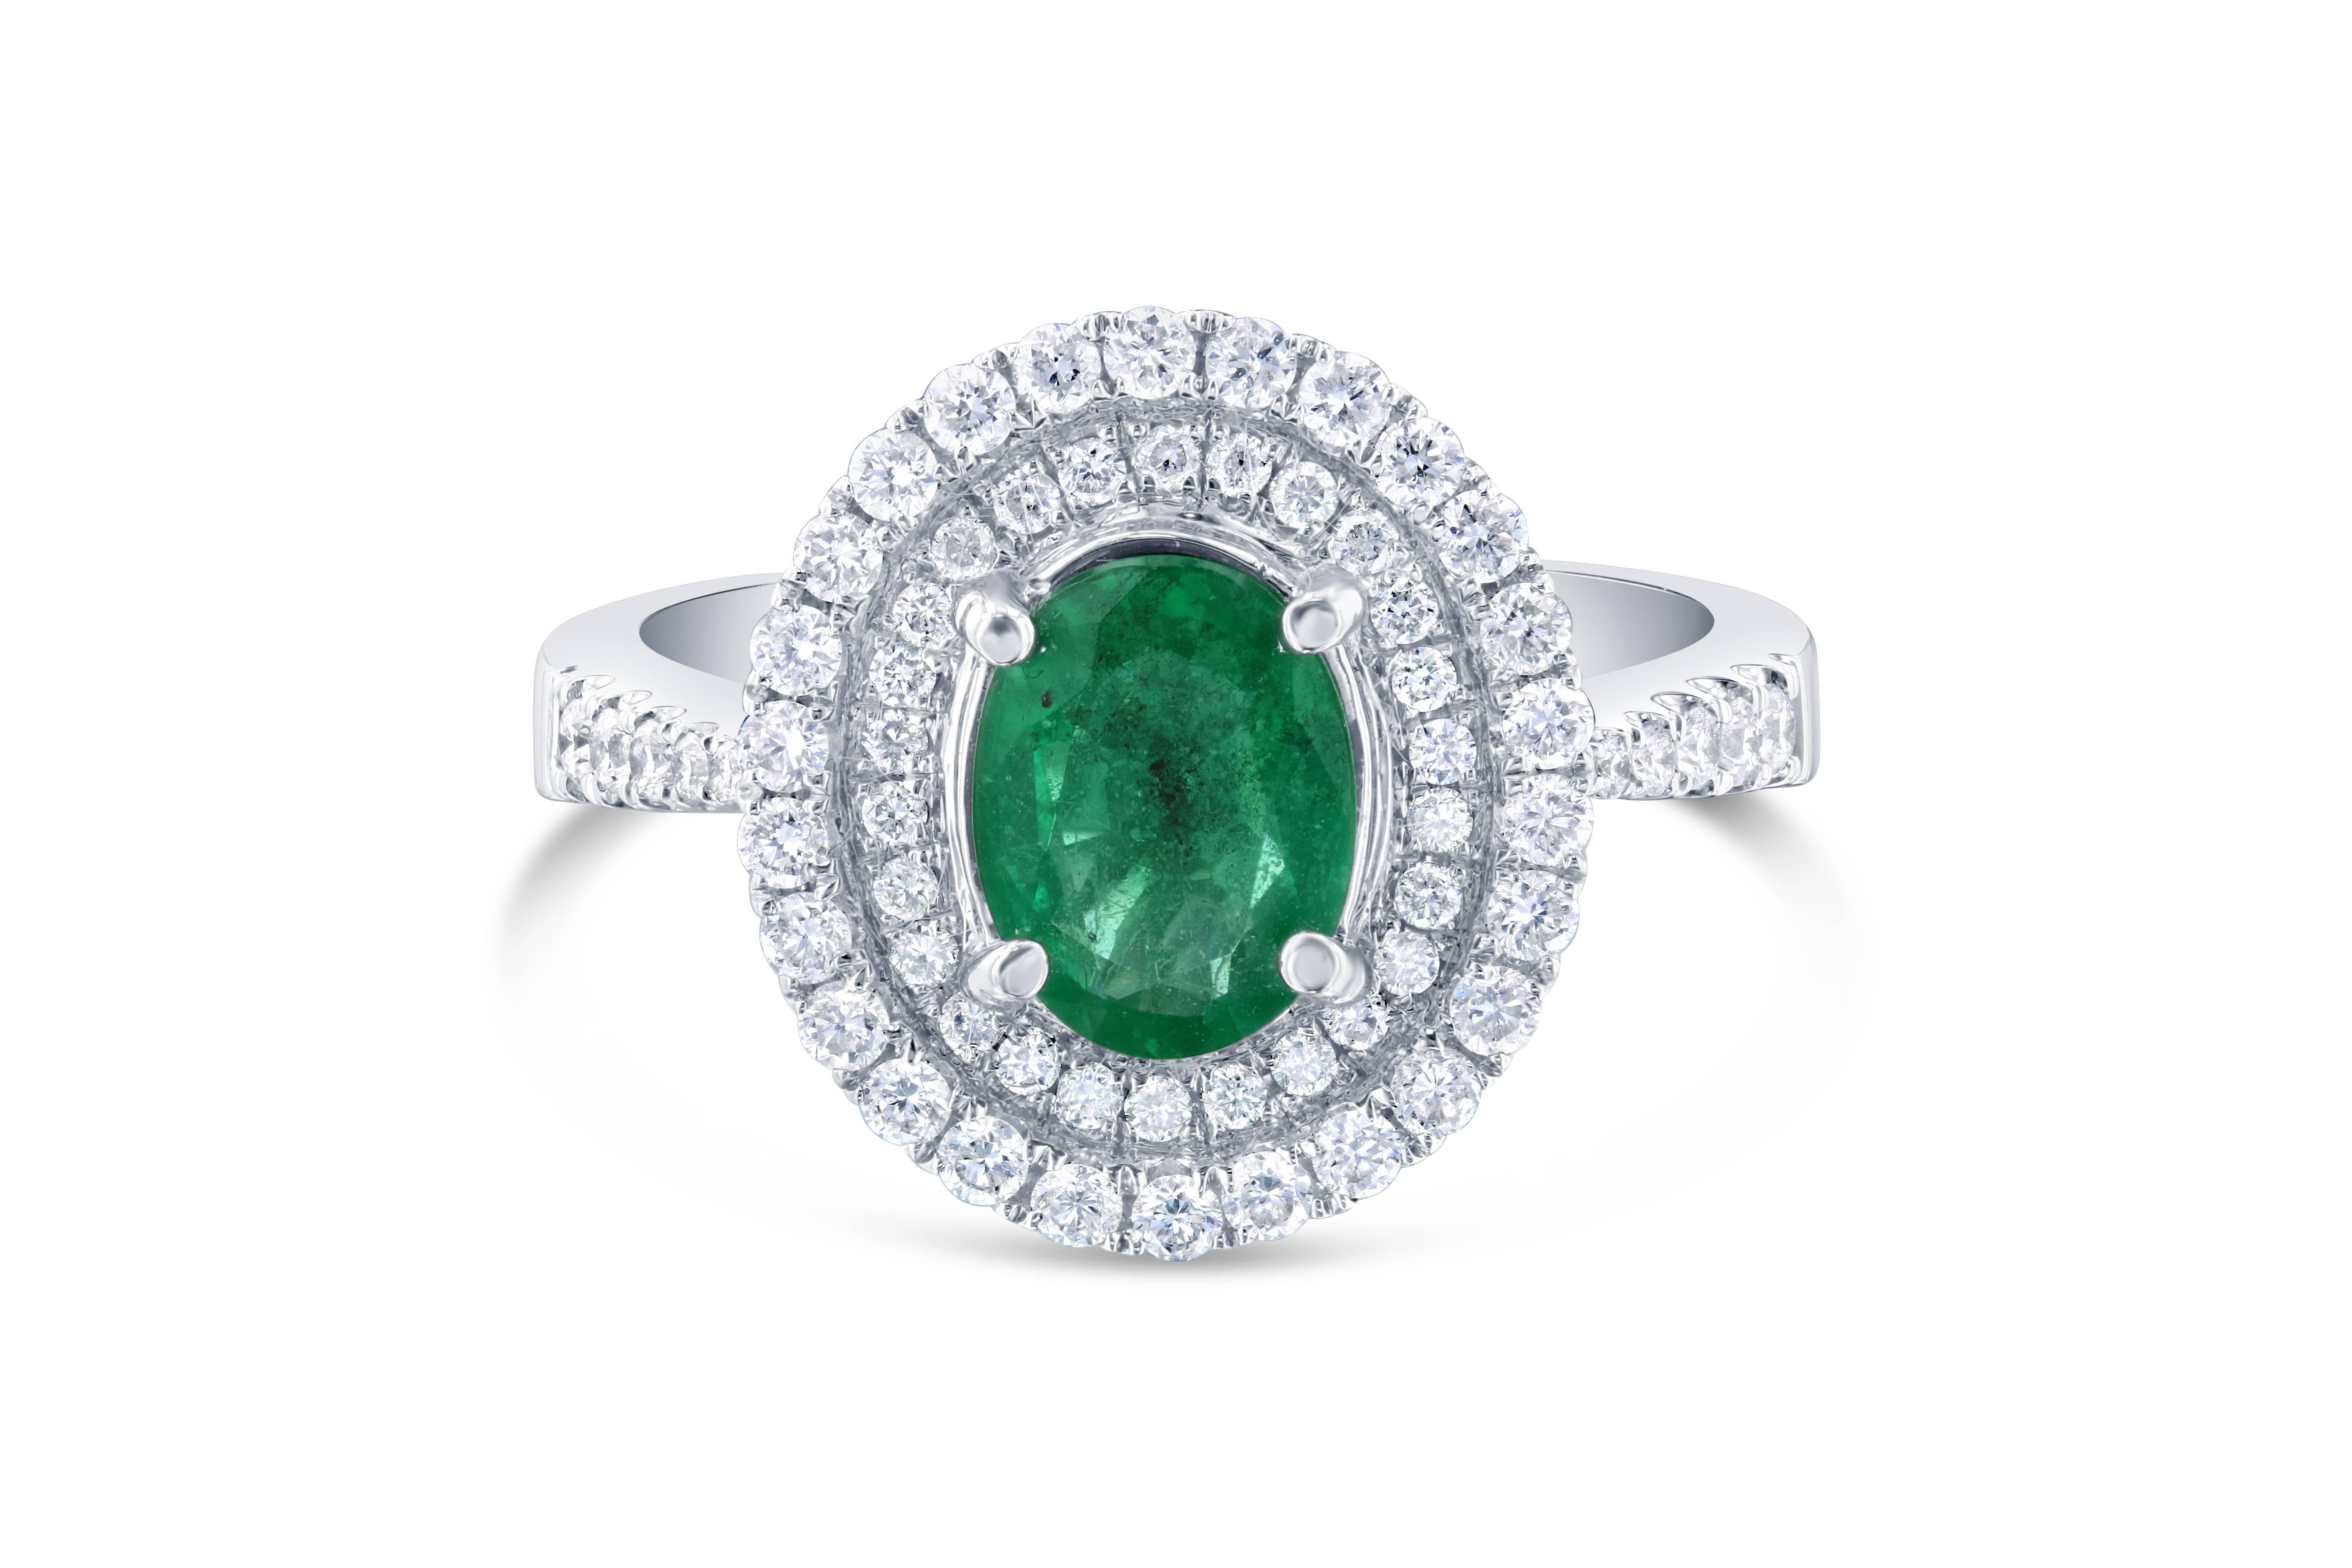  Double Halo Oval Cut Emerald Engagement Ring

This Emerald ring has a gorgeous unique look. The center oval cut Emerald is 1.00 Carat and has a Halo of 62 Round Cut Diamonds weighing 0.58 Carats. The clarity and color of the diamonds are VS-F and